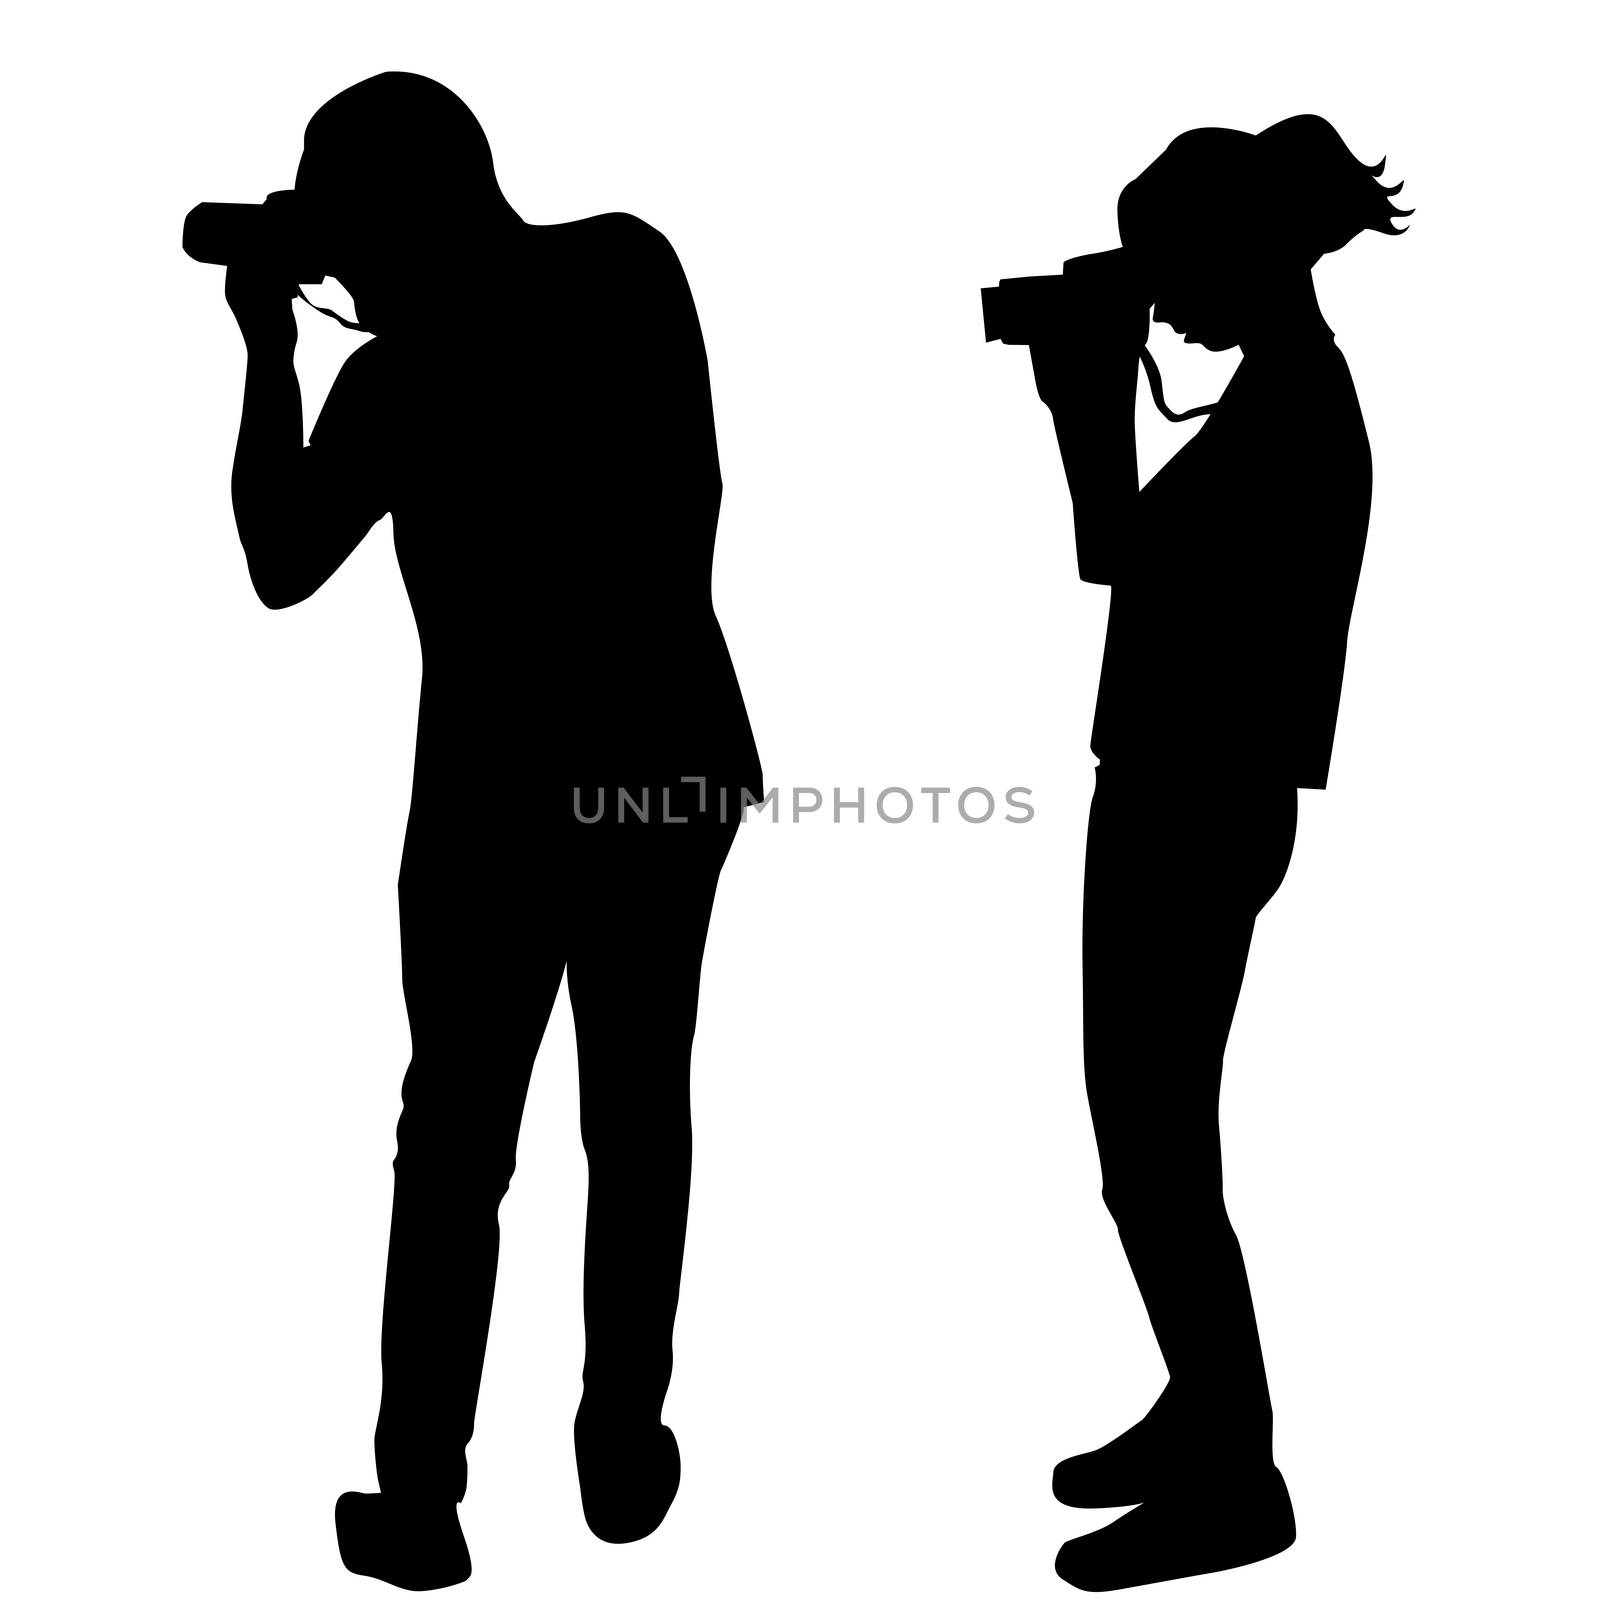 Silhouette of photographers on white background by hibrida13